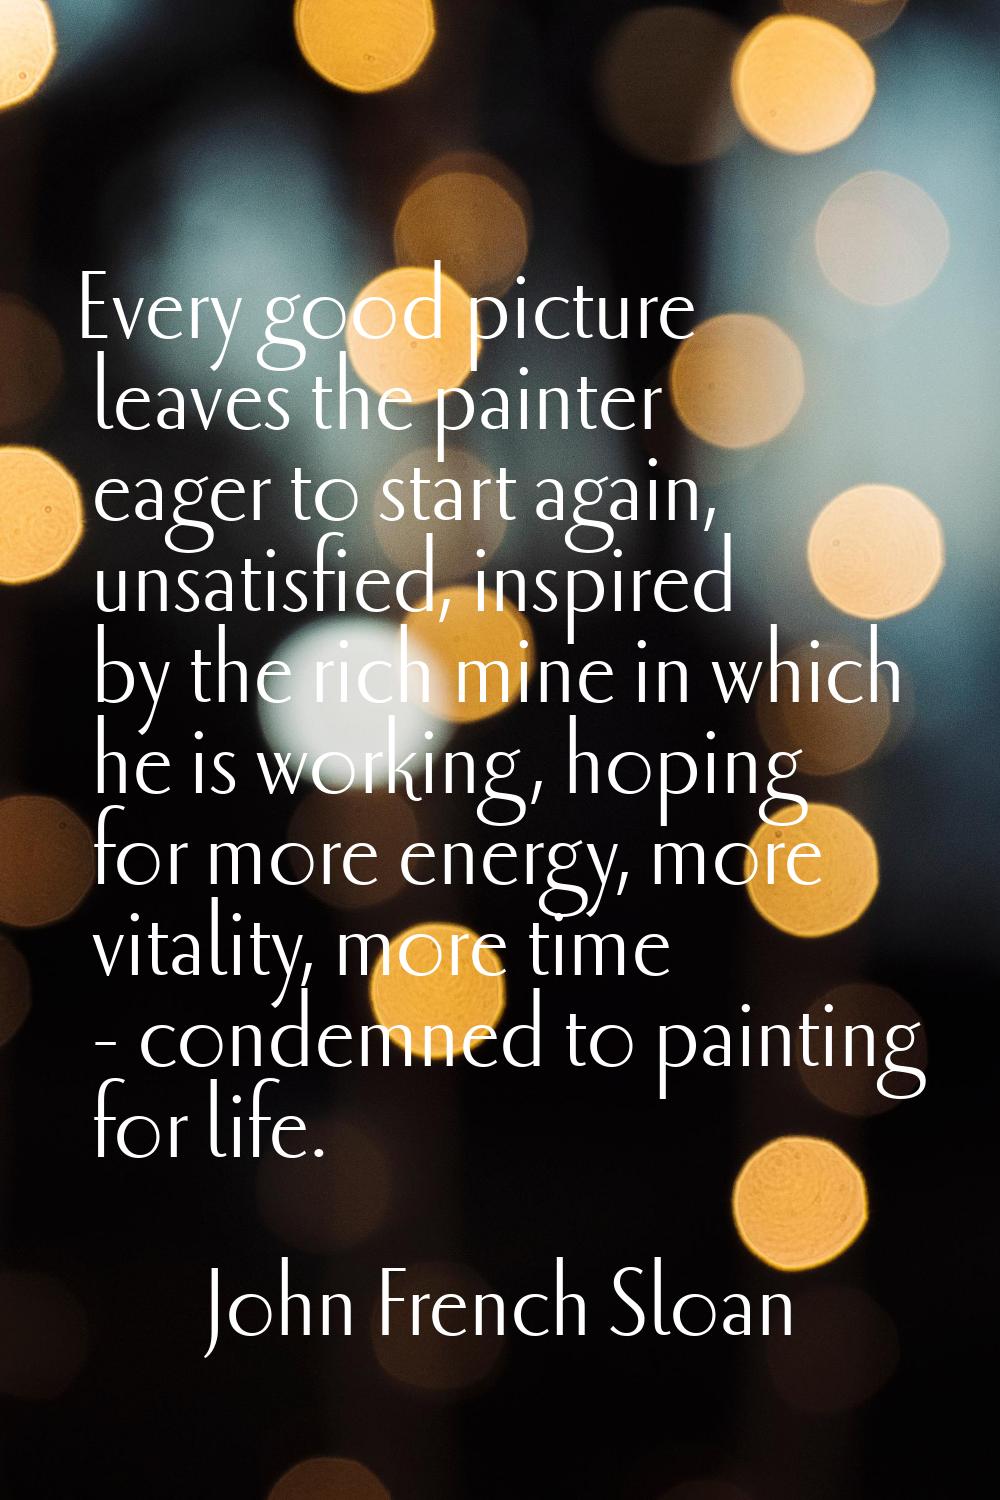 Every good picture leaves the painter eager to start again, unsatisfied, inspired by the rich mine 